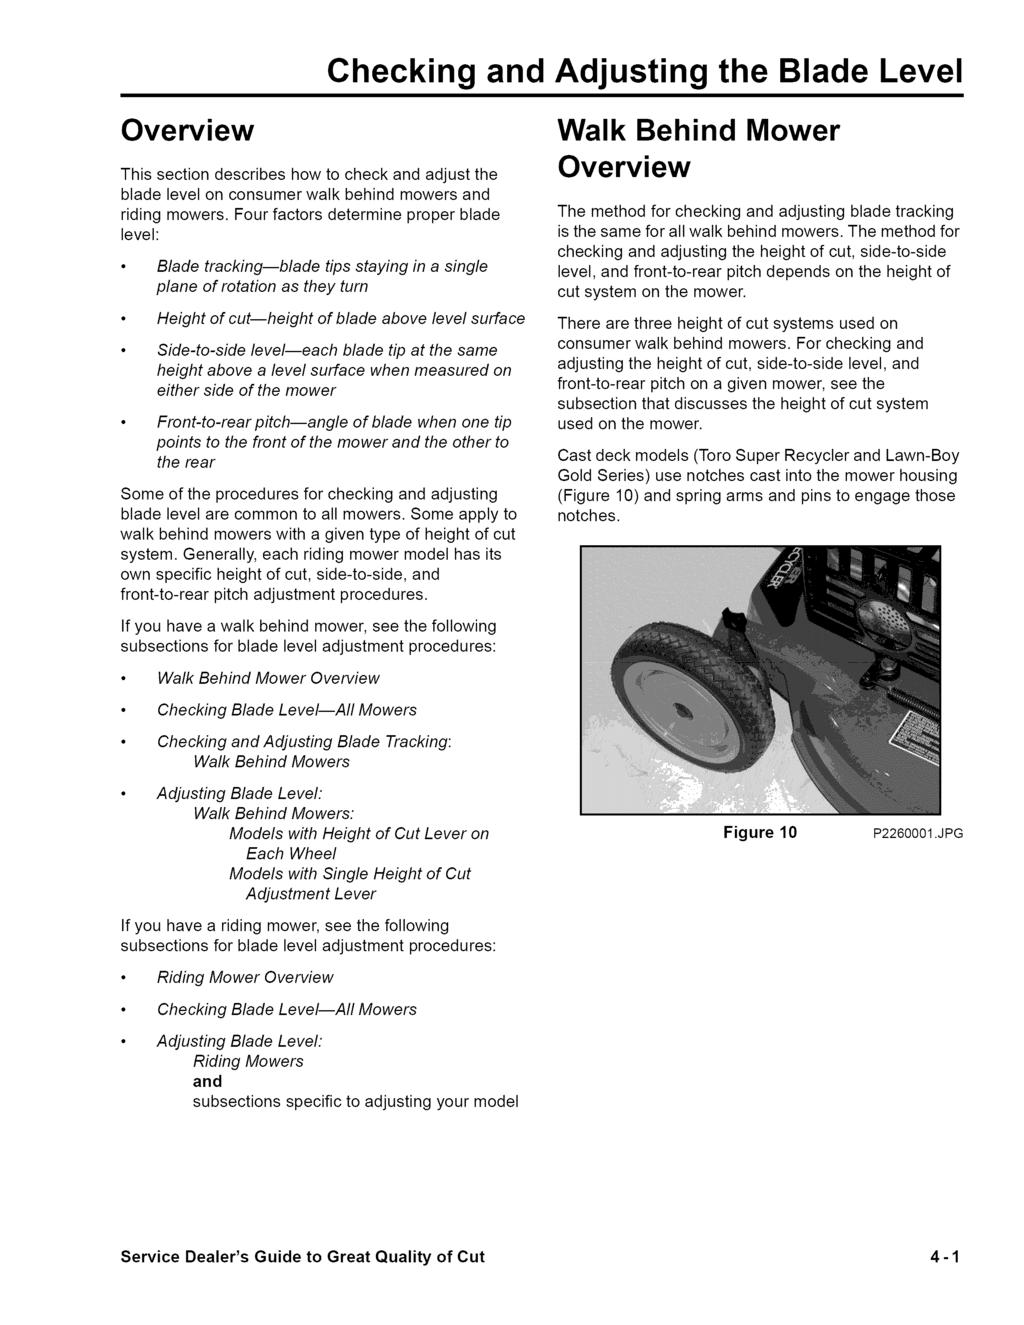 Checking and Adjusting the Blade Level Overview This section describes how to check and adjust the blade level on consumer walk behind mowers and riding mowers.